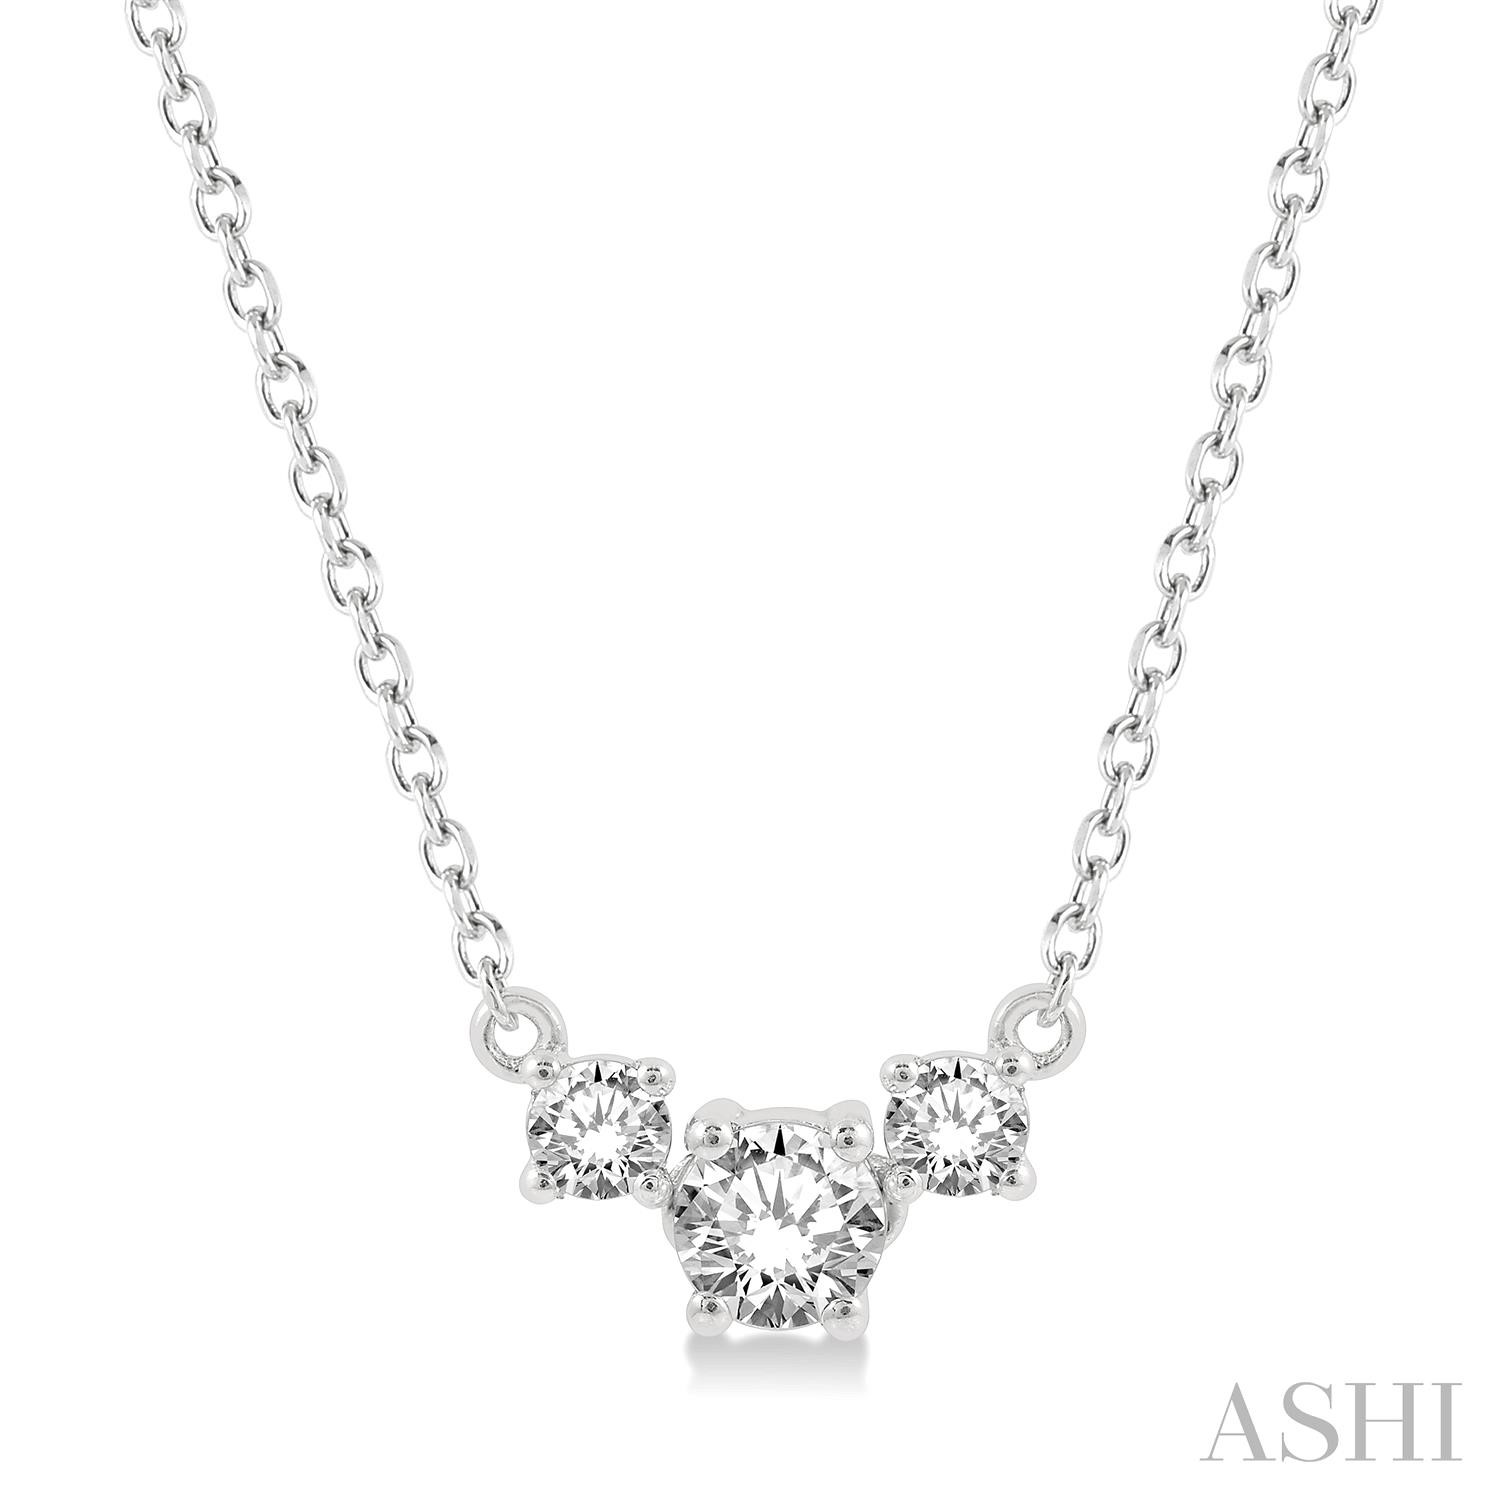 14K WHITE GOLD 3-STONE DIAMOND NECKLACE WITH ONE 0.15CT ROUND G-H SI1-SI2 DIAMOND AND 2=0.10TW ROUND G-H SI1-SI2 DIAMONDS 18